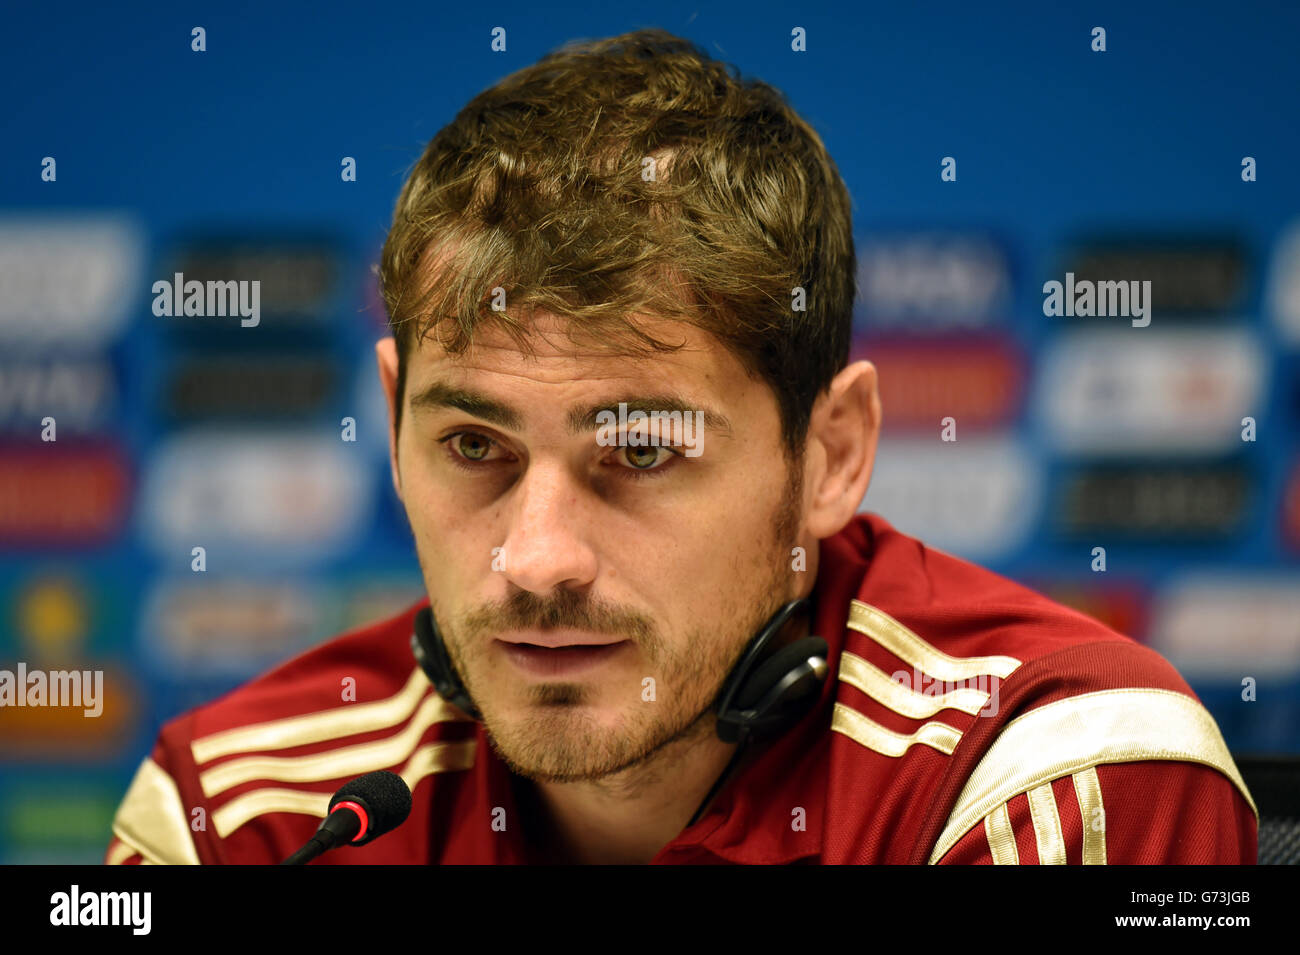 Soccer - FIFA World Cup 2014 - Group B - Spain v Netherlands - Spain Training Session - Arena Fonte Nova. Spain's Iker Casillas during a press conference Stock Photo